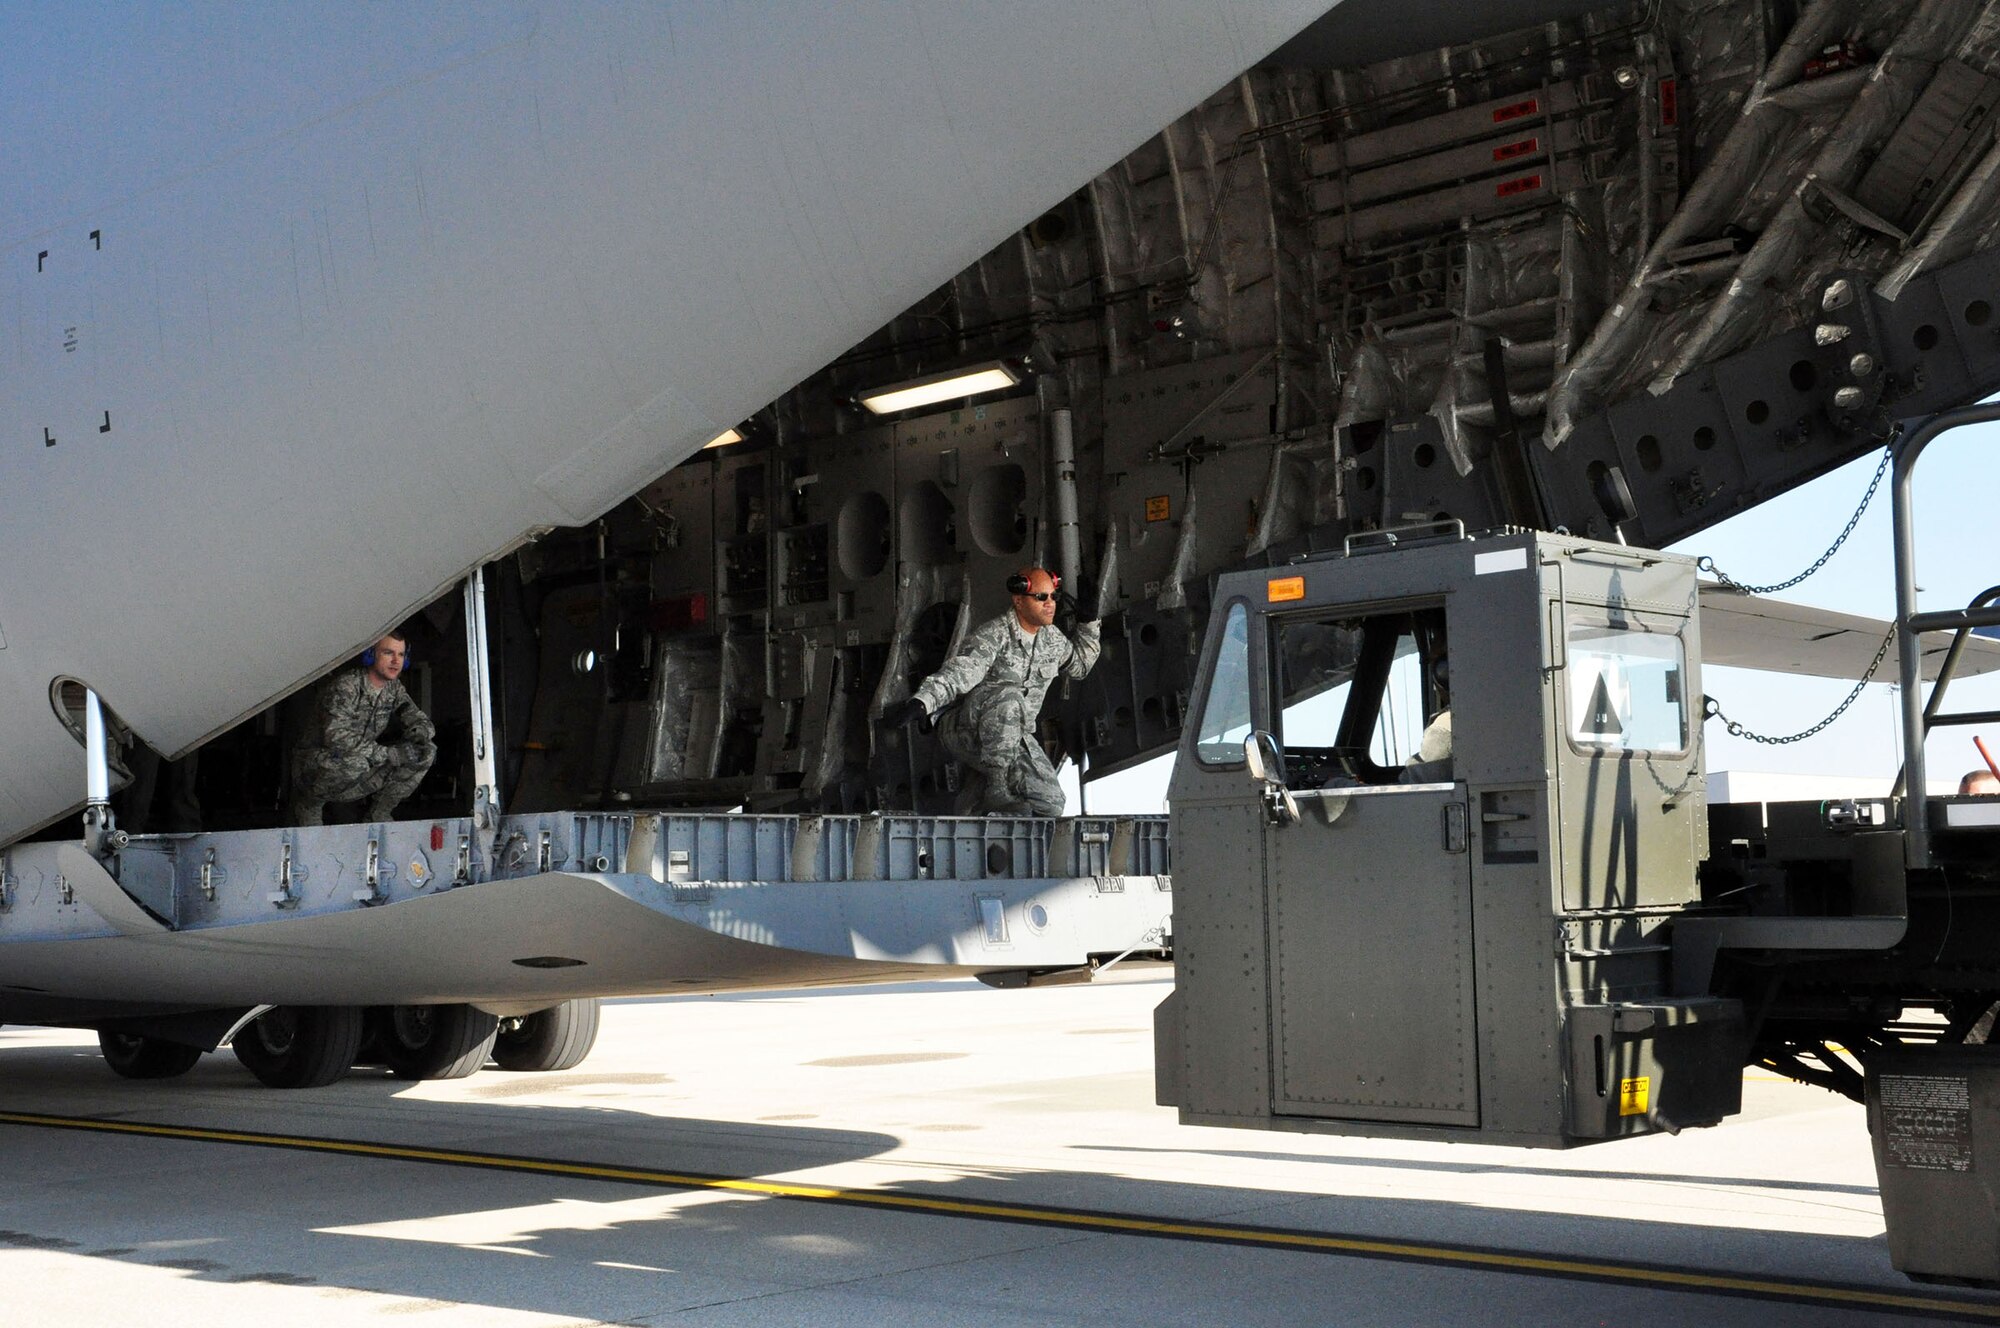 Airmen from the 87th Aerial Port Squadron unload cargo from a 445th Airlift Wing C-17 Globemaster III November 6, 2016 on the west ramp at Wright-Patterson Air Force Base, Ohio. (U.S. Air Force photo/Staff Sgt. Rachel Ingram)